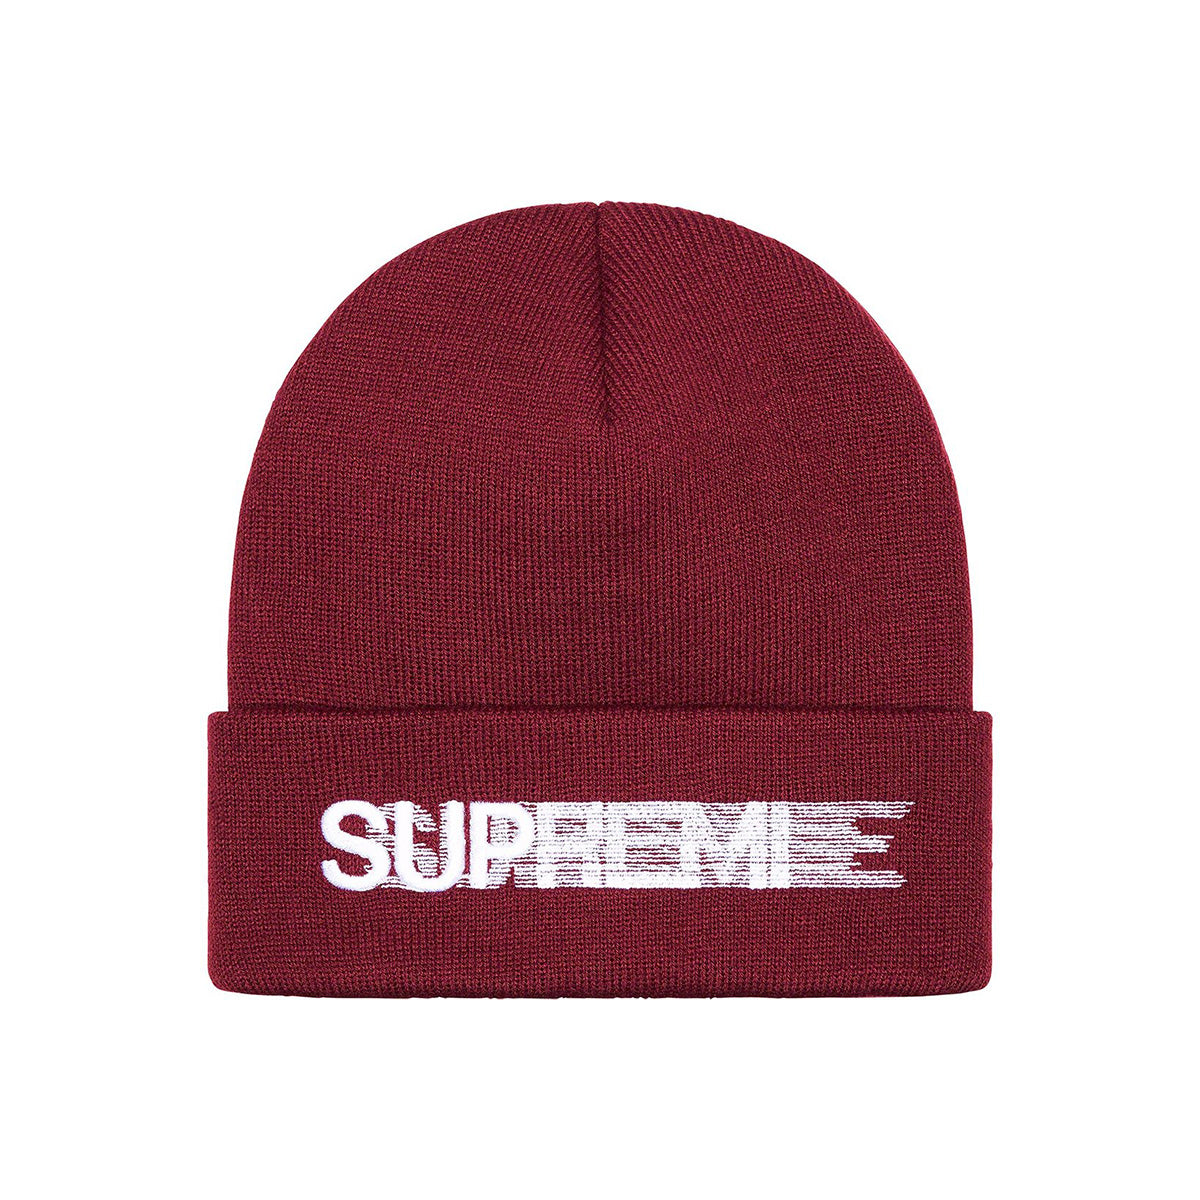 Supreme NYC Loose Gauge Red/White Knit Beanie Winter Hat One Size